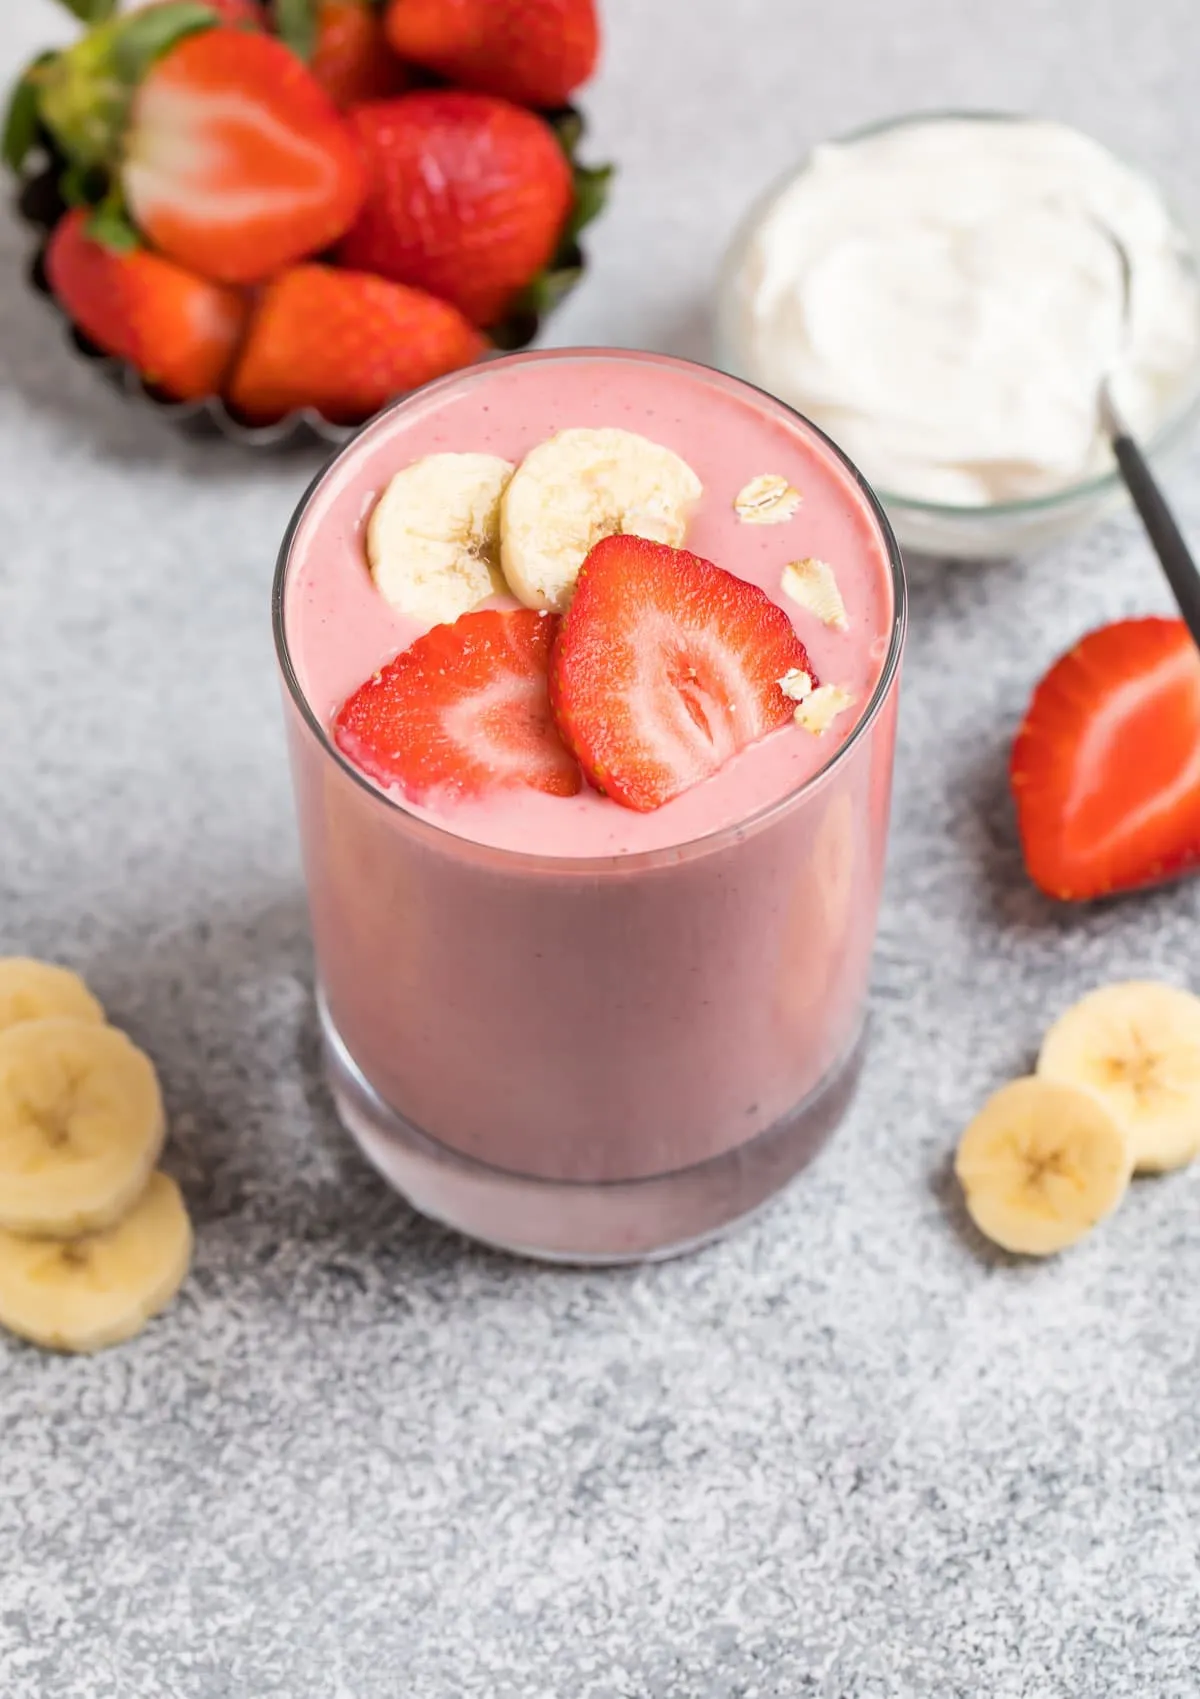 A healthy breakfast smoothie made with peanut butter, strawberries, and bananas